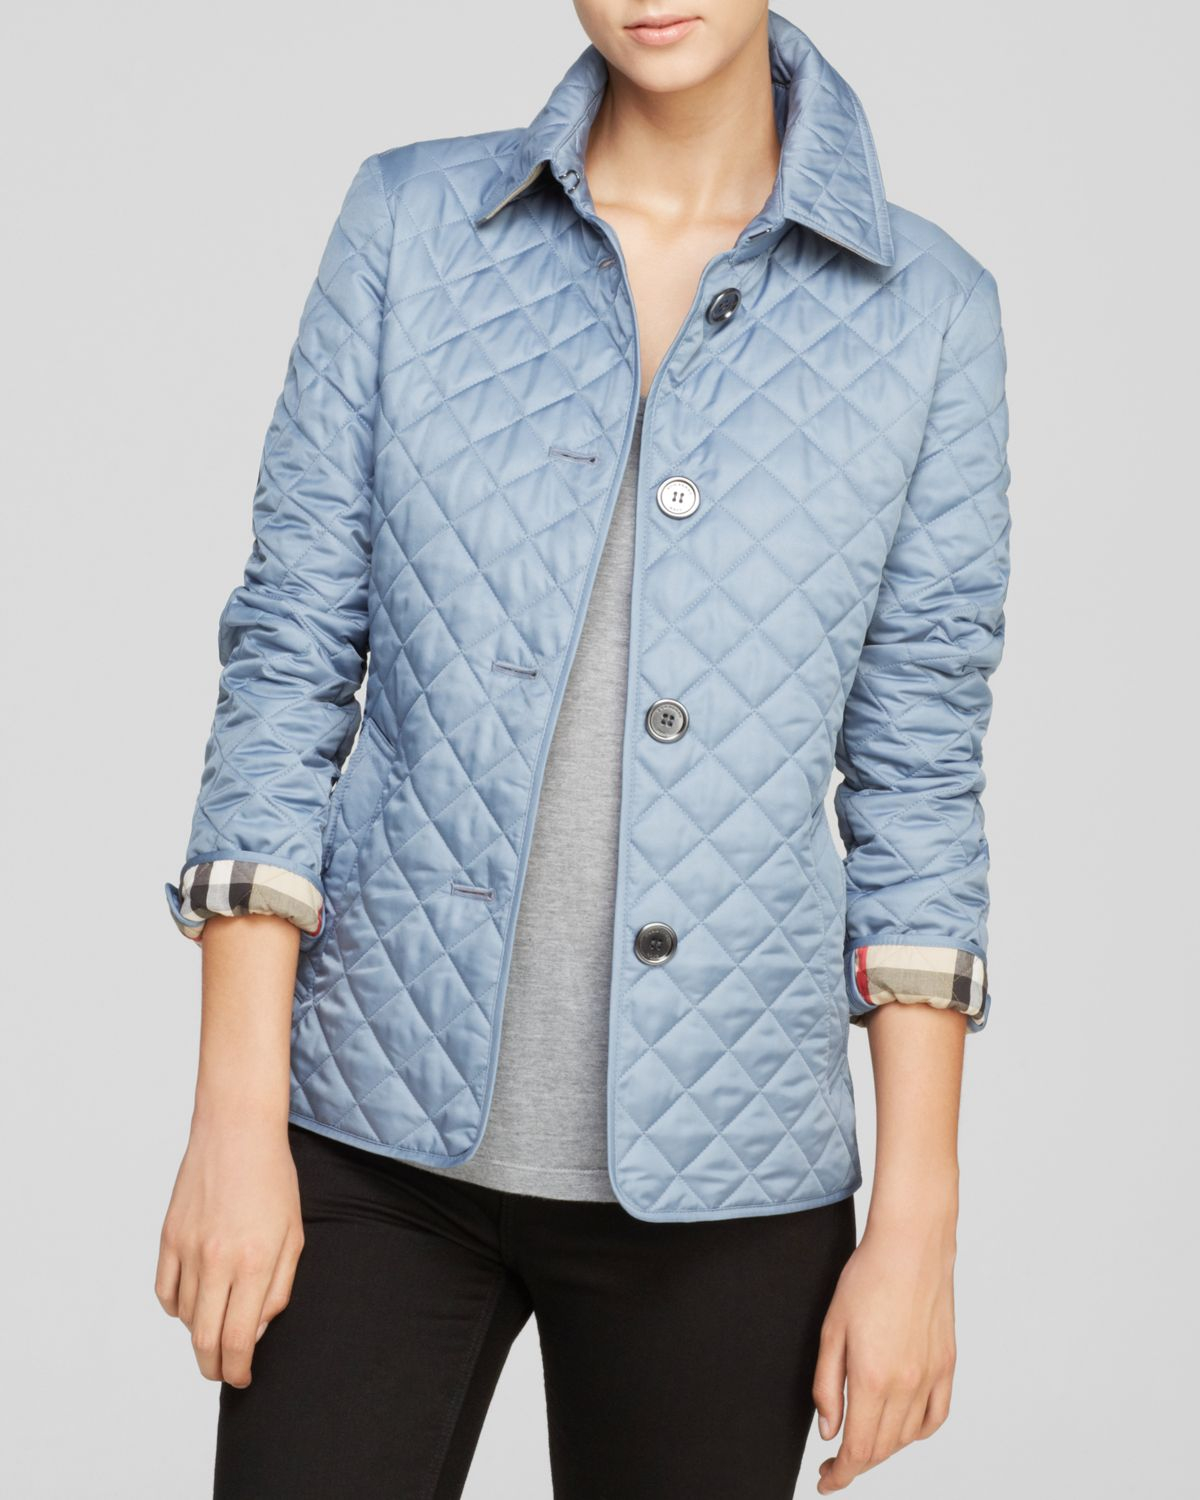 Burberry Brit Diamond Quilted Jacket in 